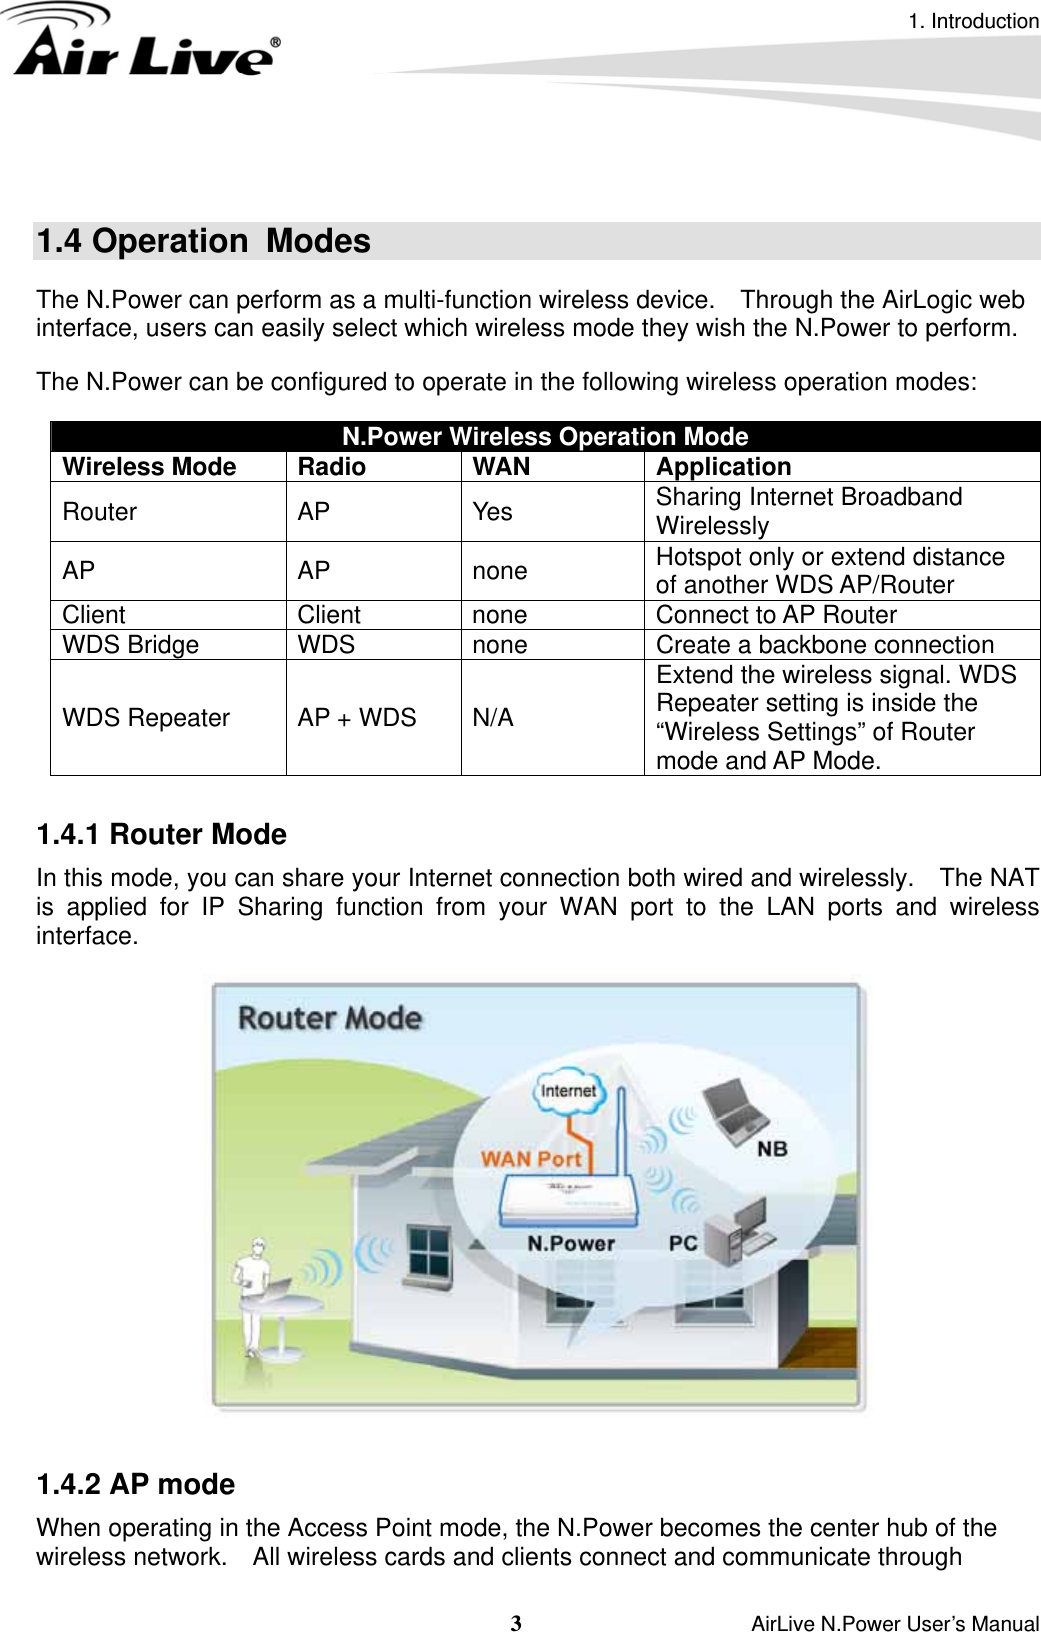 1. Introduction 3                    AirLive N.Power User’s Manual  1.4 Operation  Modes The N.Power can perform as a multi-function wireless device.    Through the AirLogic web interface, users can easily select which wireless mode they wish the N.Power to perform.   The N.Power can be configured to operate in the following wireless operation modes:   N.Power Wireless Operation Mode Wireless Mode Radio   WAN Application Router AP  Yes Sharing Internet Broadband Wirelessly AP AP none Hotspot only or extend distance of another WDS AP/Router Client Client none Connect to AP Router WDS Bridge  WDS  none  Create a backbone connection WDS Repeater  AP + WDS  N/A Extend the wireless signal. WDS Repeater setting is inside the “Wireless Settings” of Router mode and AP Mode.  1.4.1 Router Mode In this mode, you can share your Internet connection both wired and wirelessly.    The NAT is applied for IP Sharing function from your WAN port to the LAN ports and wireless interface.   1.4.2 AP mode When operating in the Access Point mode, the N.Power becomes the center hub of the wireless network.    All wireless cards and clients connect and communicate through 